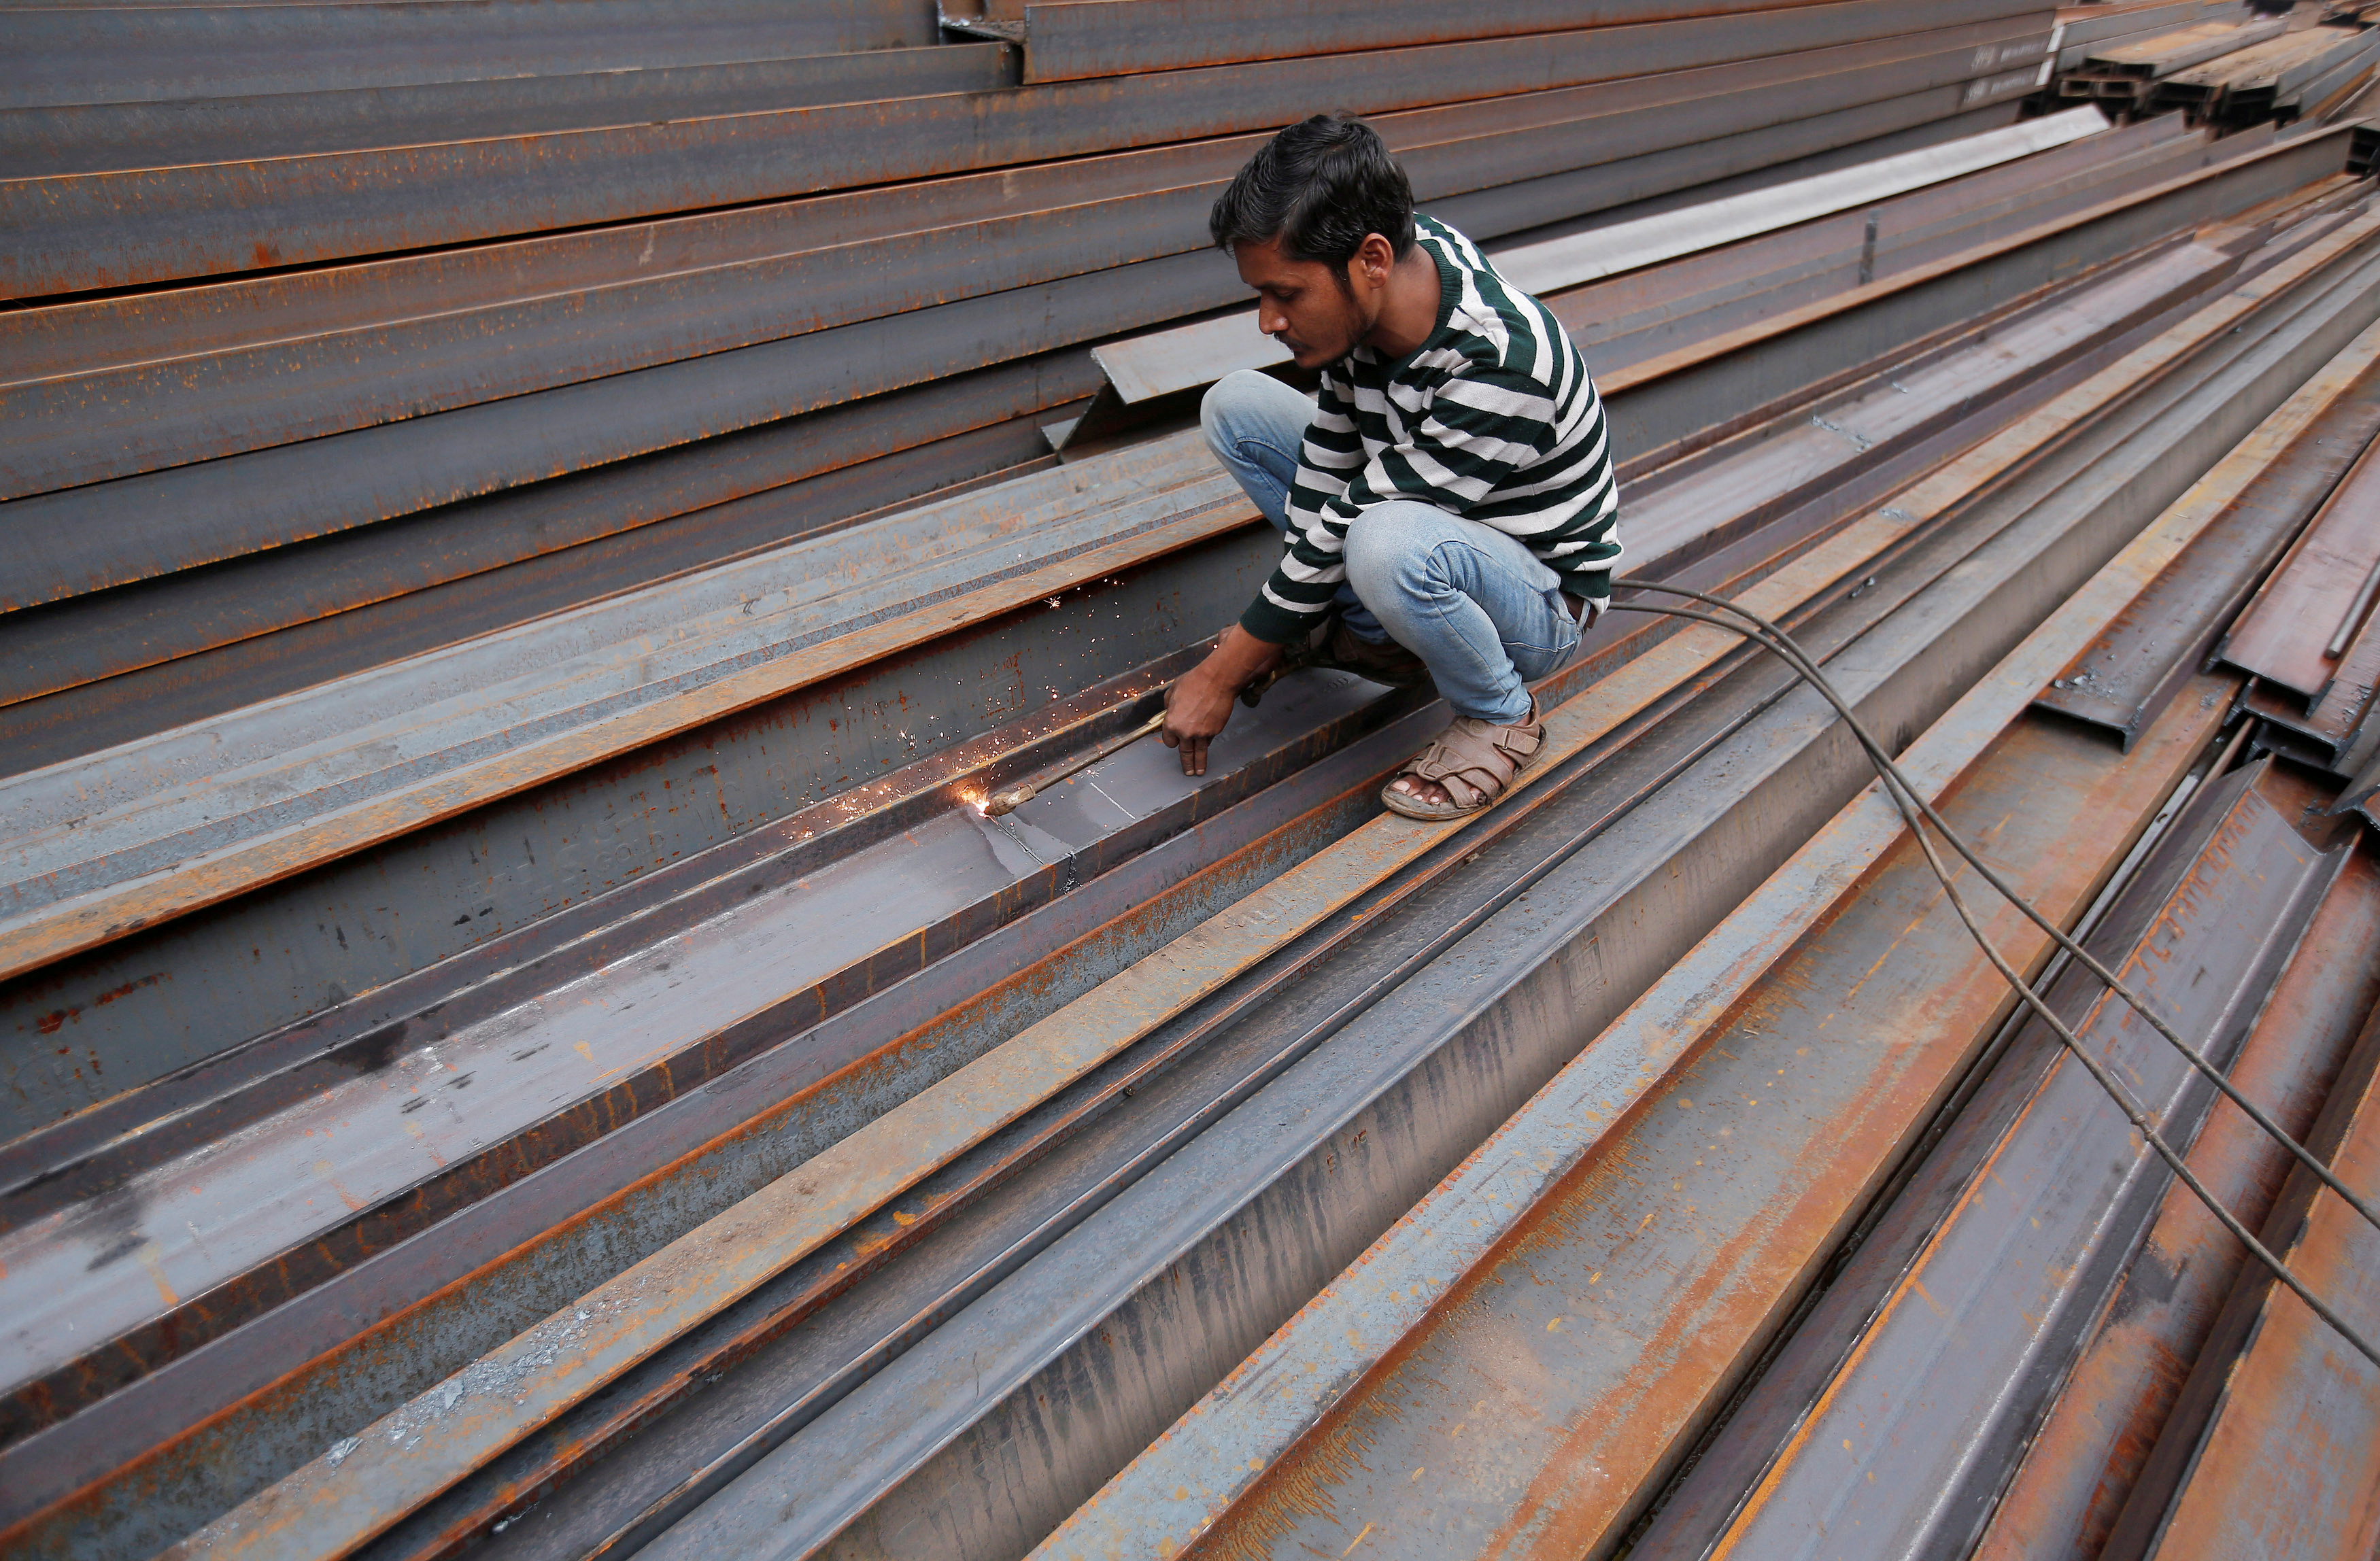 A worker cuts iron rods outside a workshop at an iron and steel market in an industrial area in New Delhi